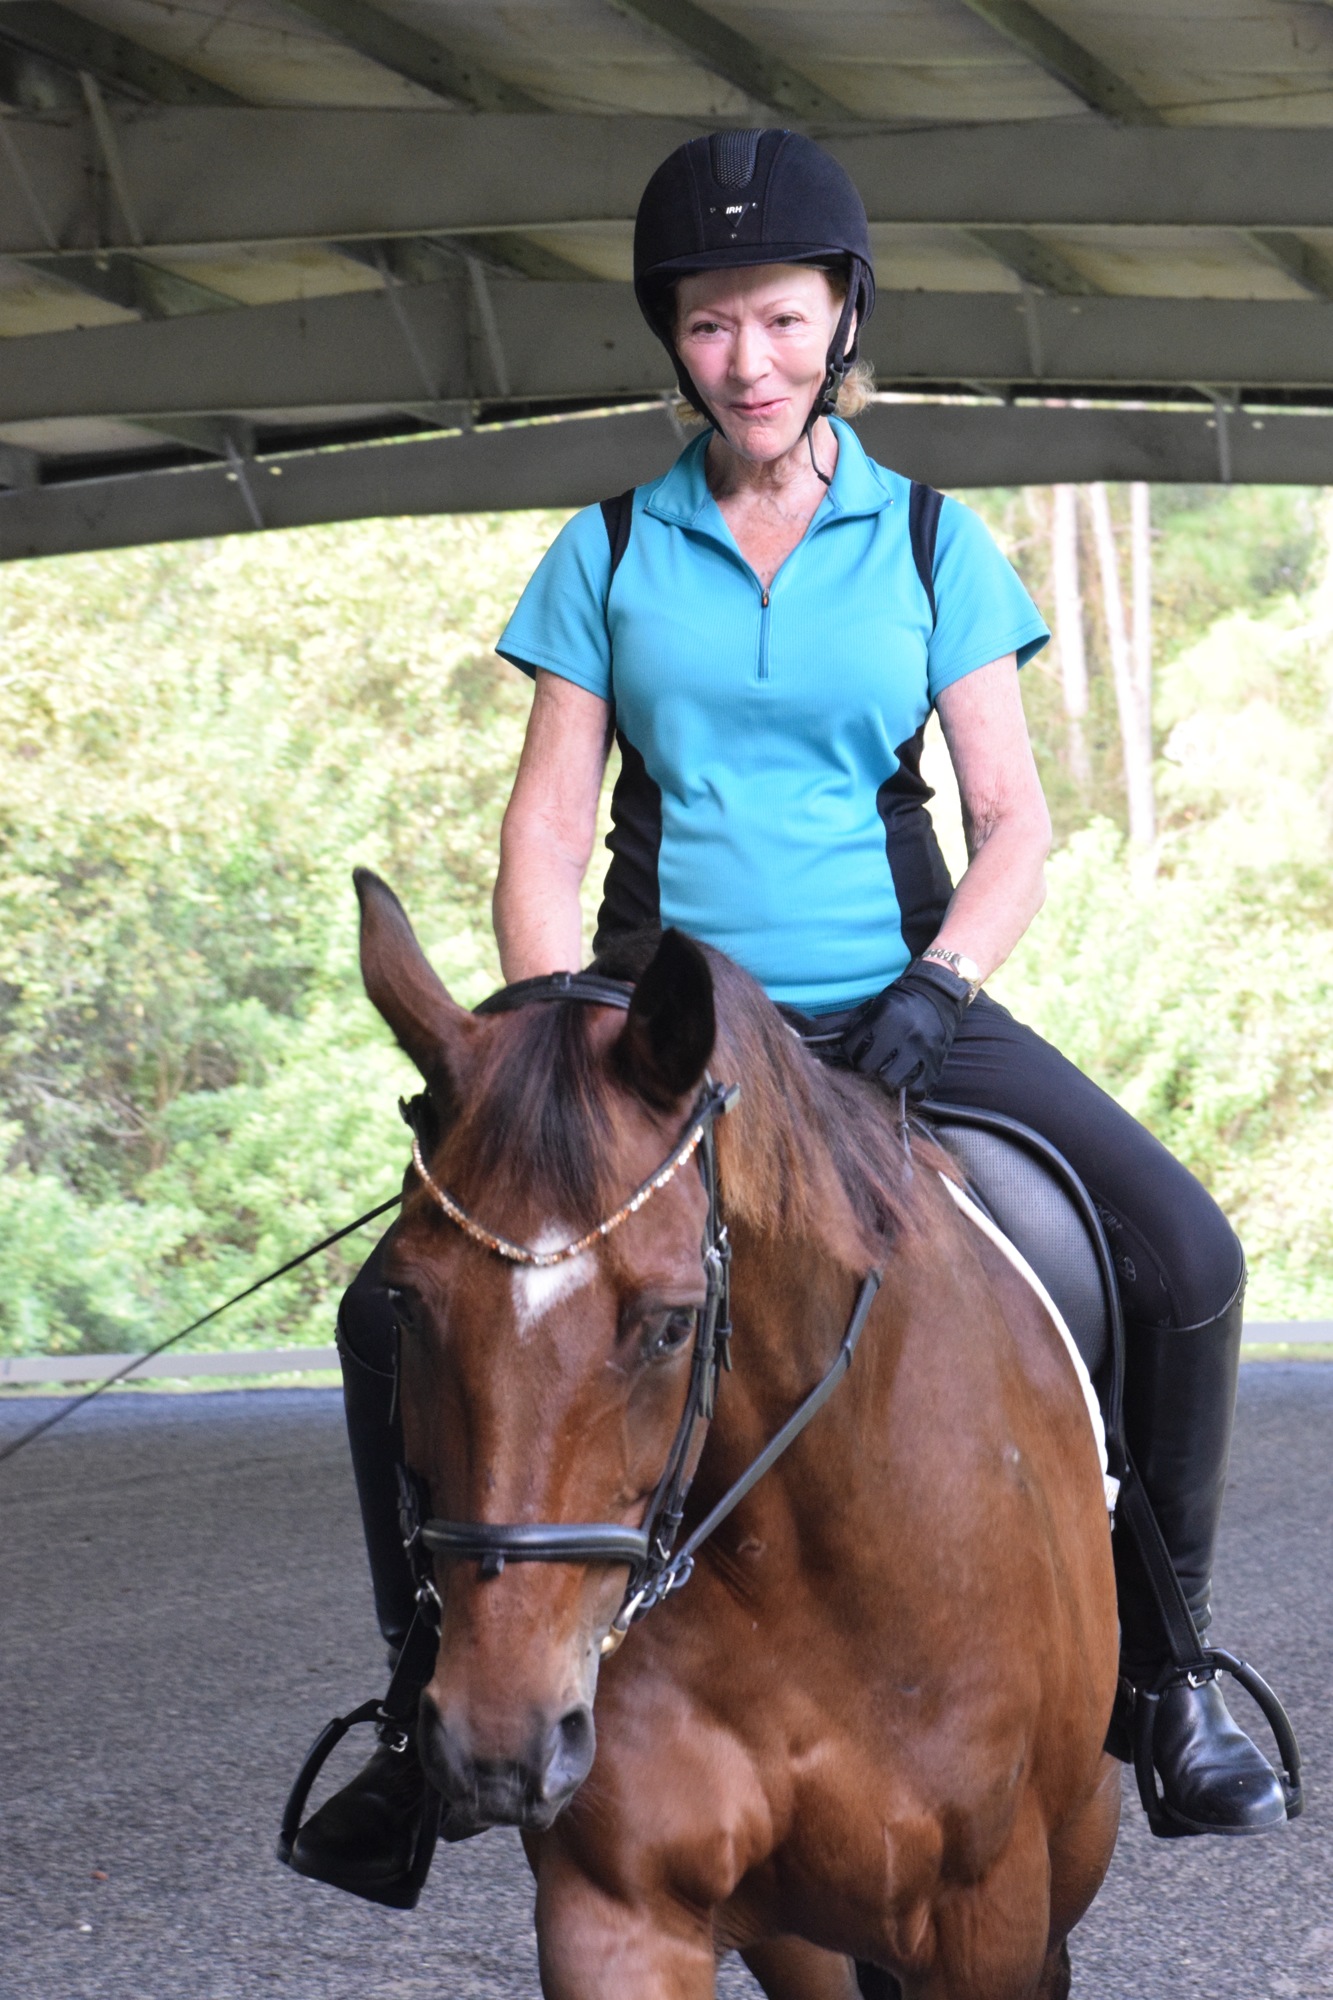 University Place's Claudia Pennington, who is 74, has been riding since she was 6 years old. She started with ponies before riding horses at 10 years old and taking lessons at 12 years old.